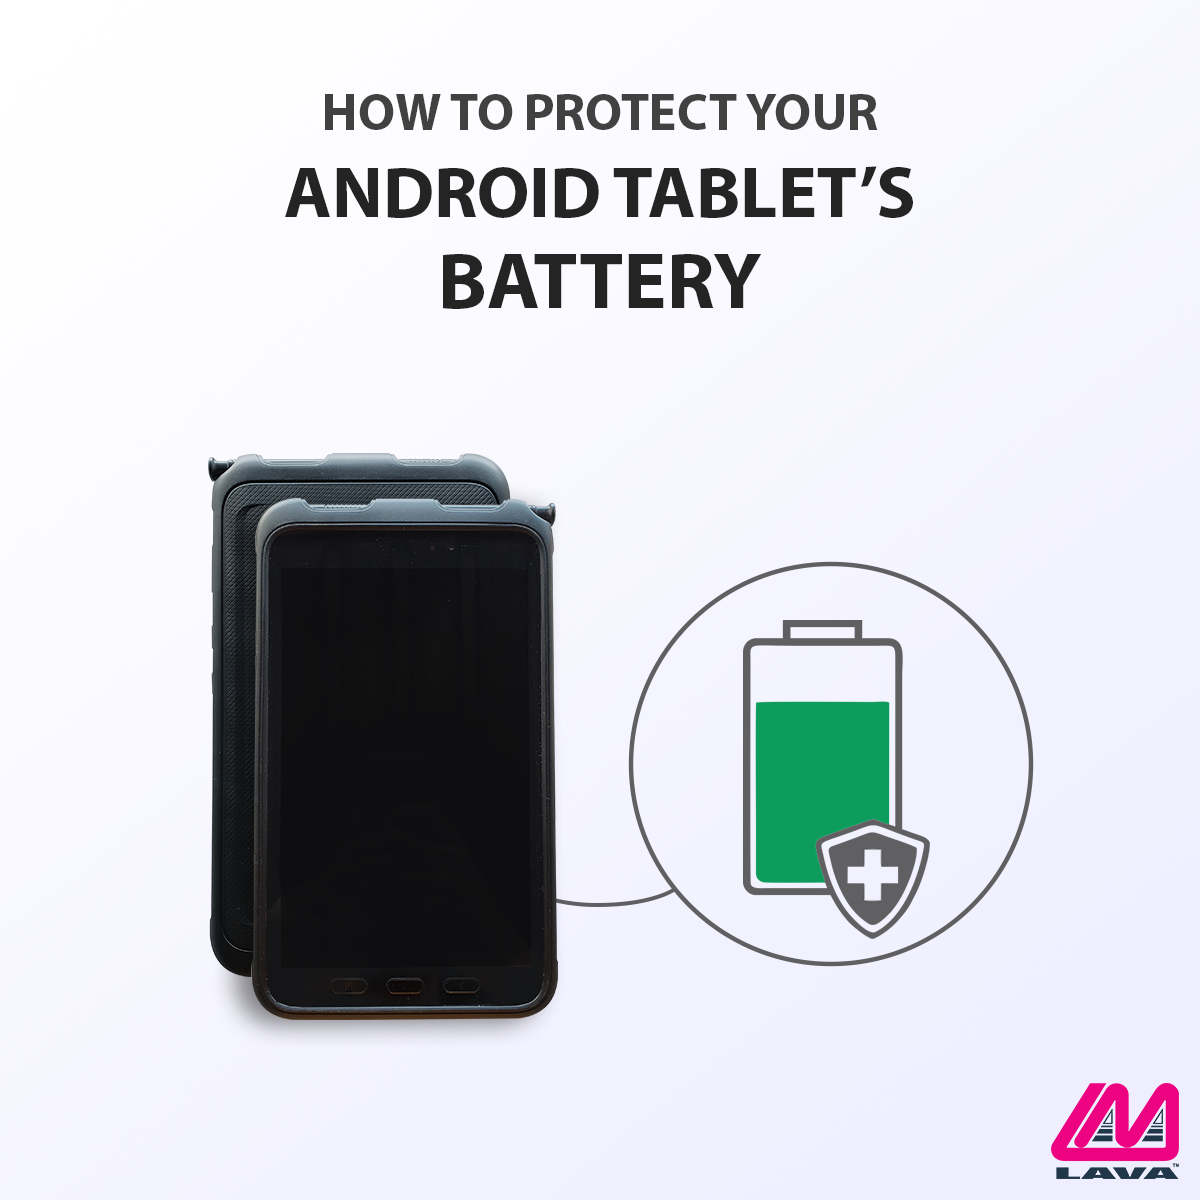 How to Protect your Android Tablet's Battery